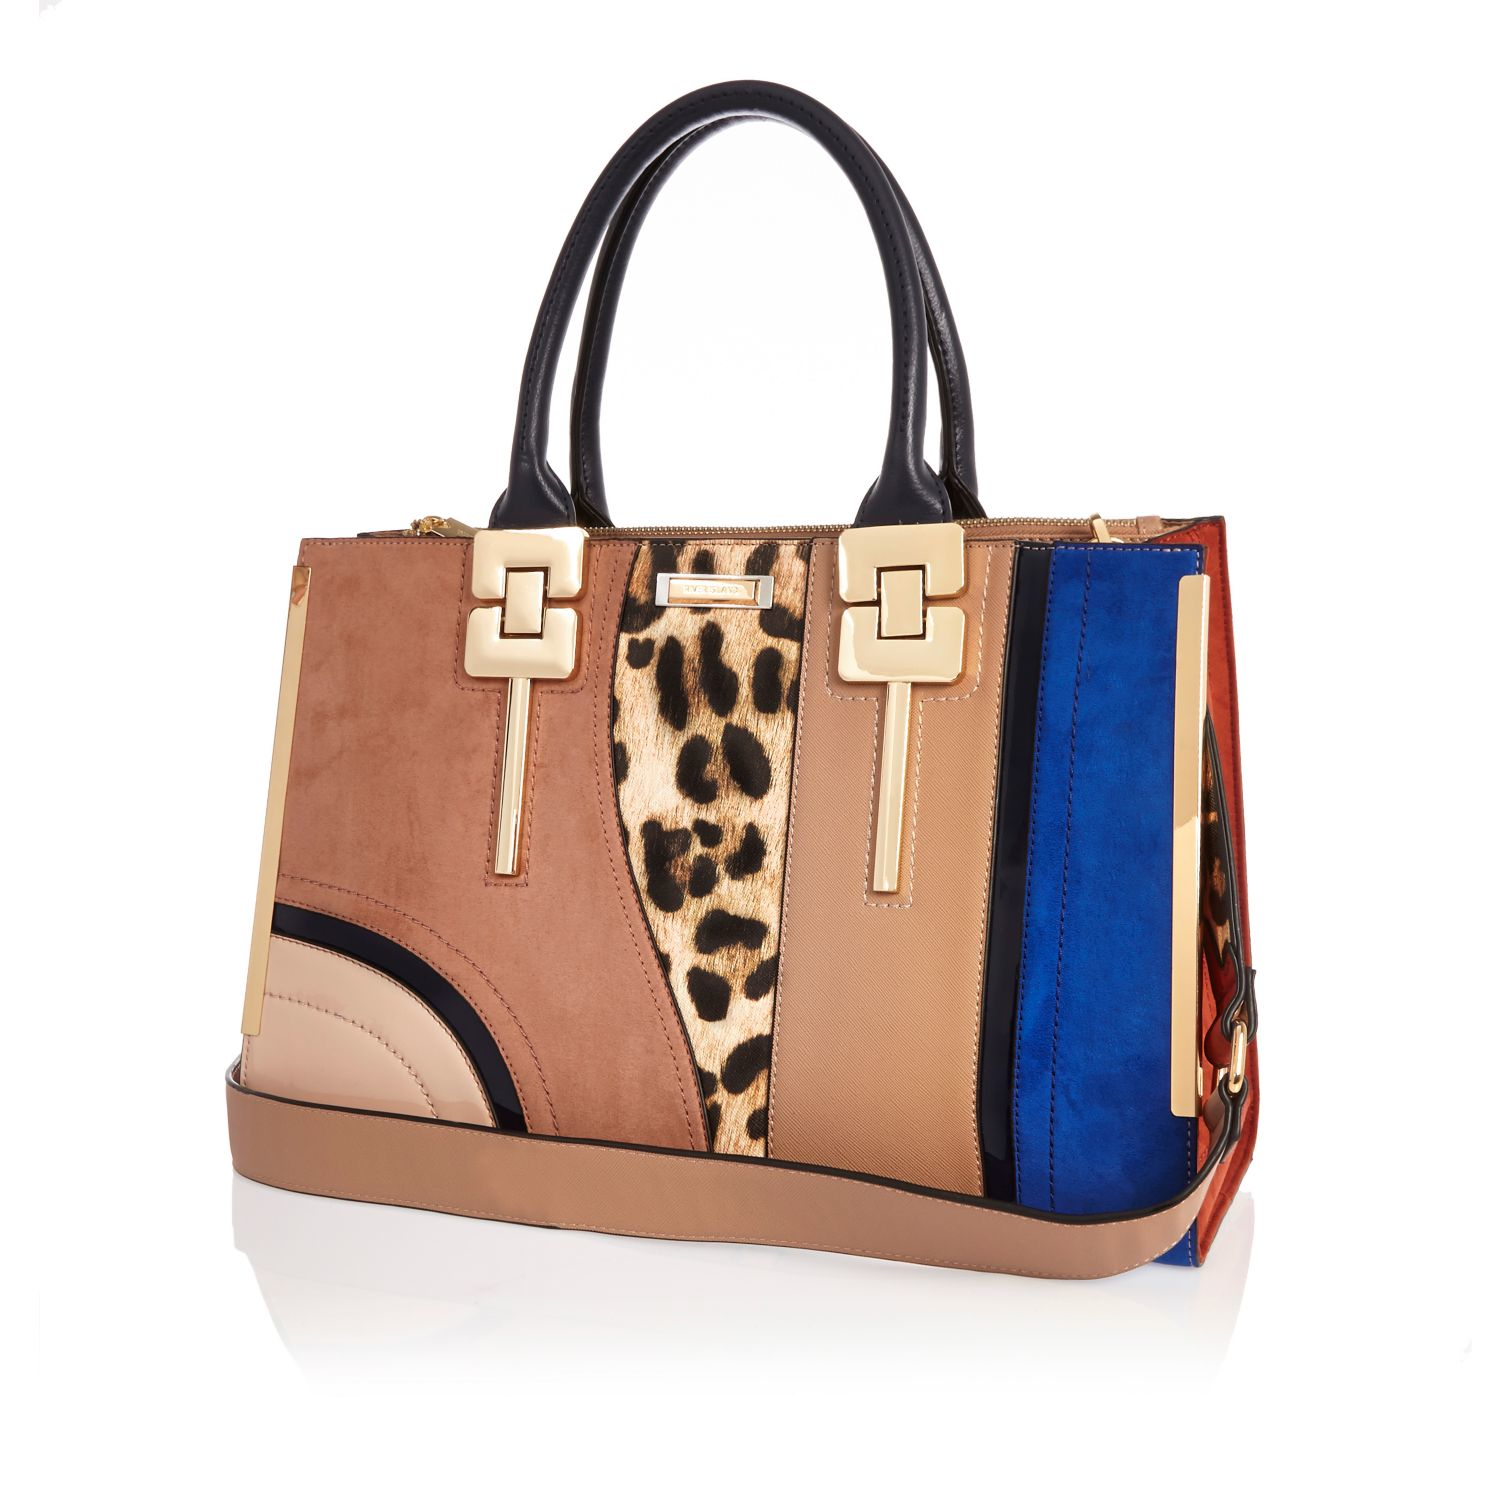 River Island Brown Patchwork Tote Bag - Lyst